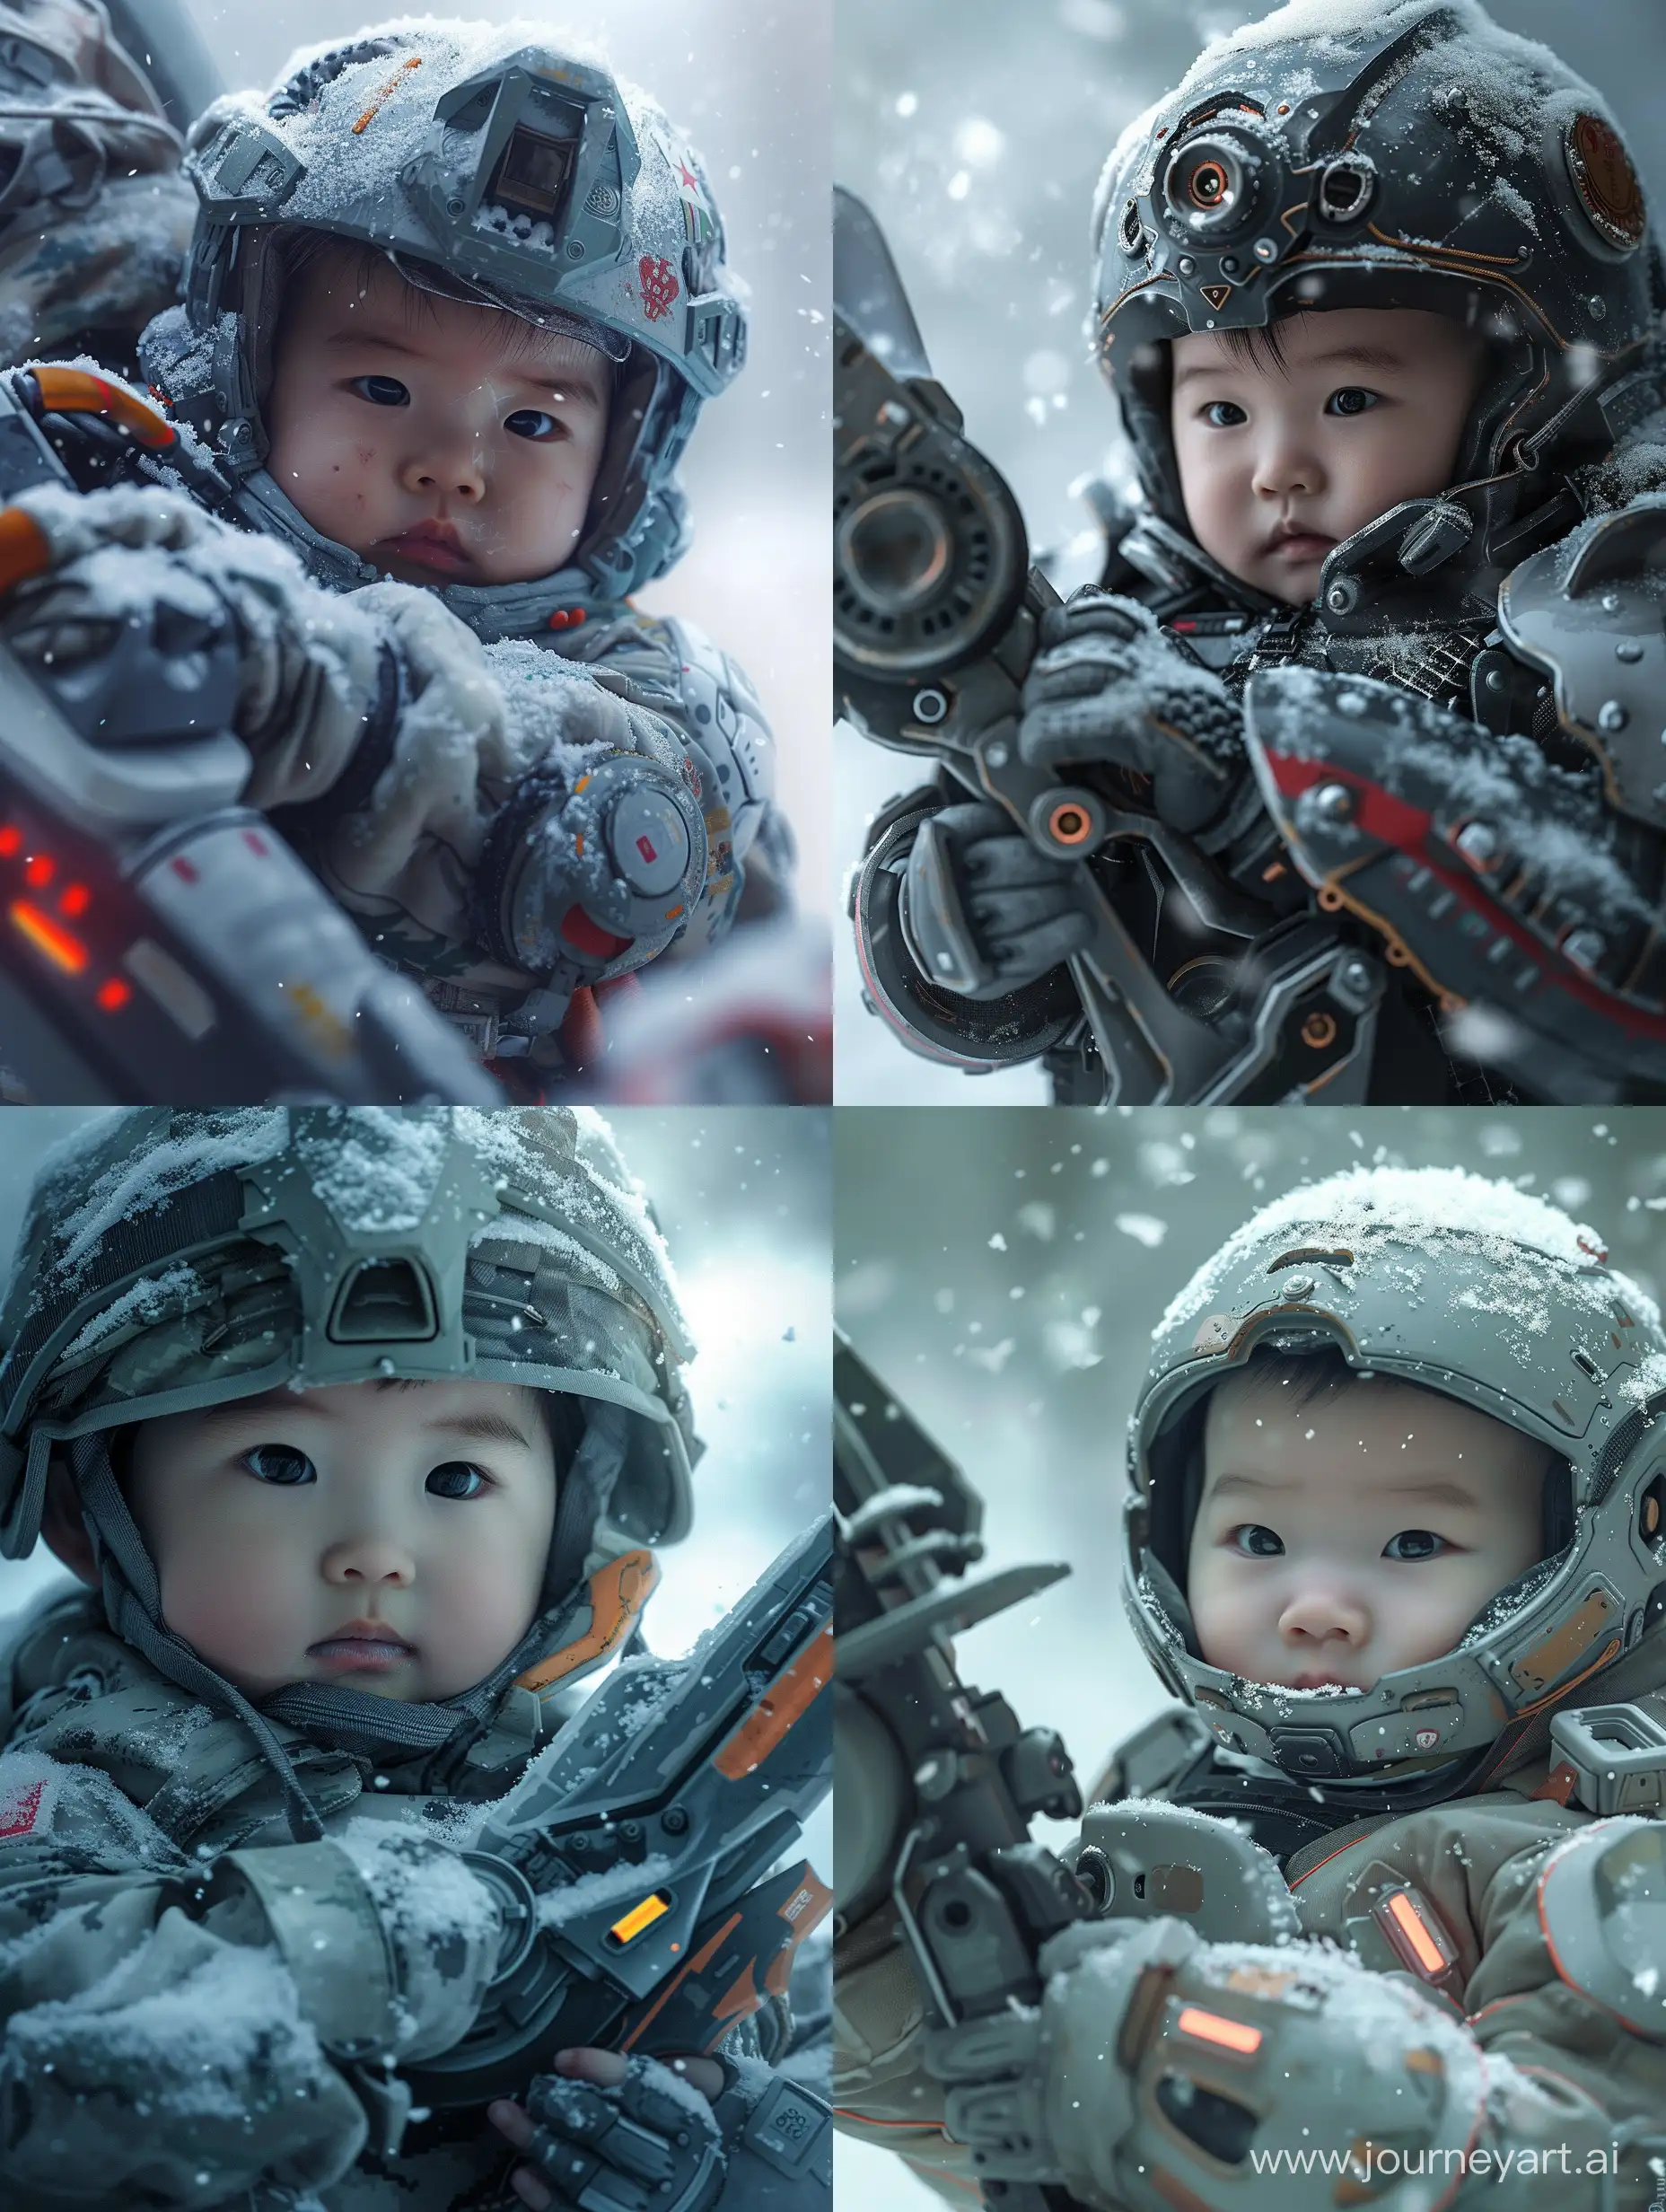 A 1-year-old baby dressed in a Chinese special forces uniform, holding a futuristic weapon with a helmet resembling a mech suit. The close-up shot captures the baby's face in the snowy weather, creating a stunning and picturesque scene. Enhance the image with 8k HDR best quality to amplify its beauty. 